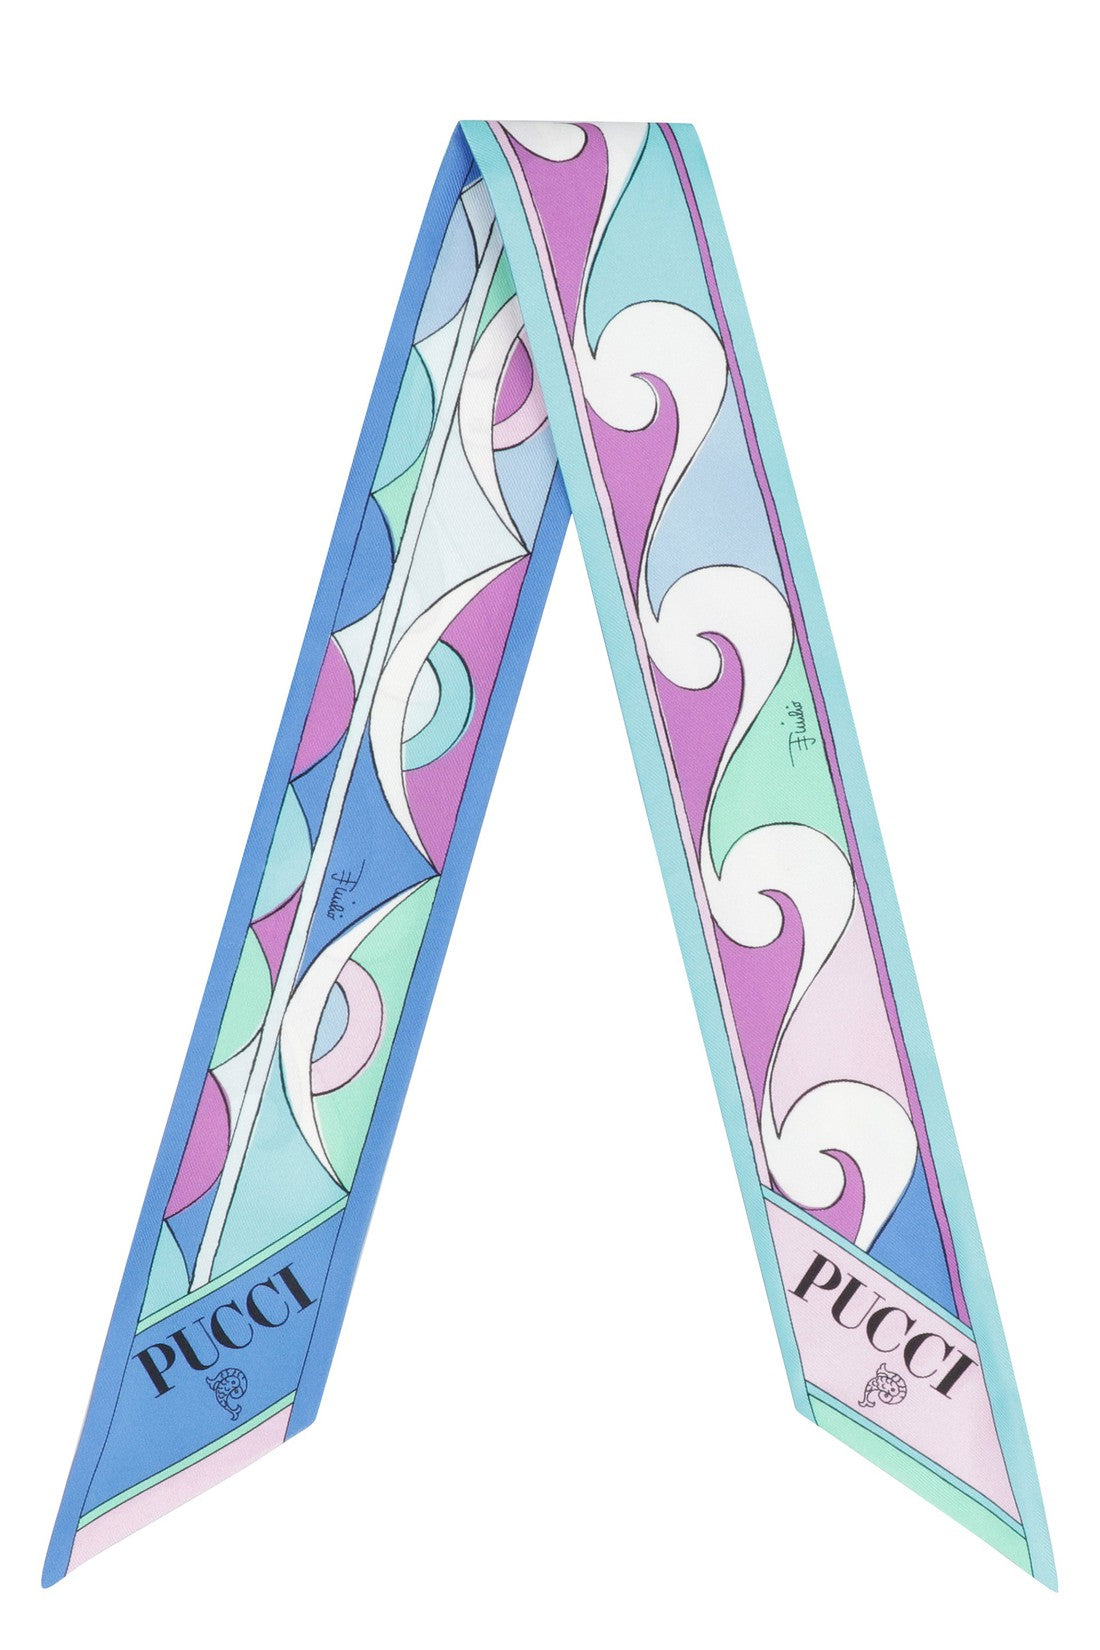 PUCCI-OUTLET-SALE-Printed silk scarf-ARCHIVIST